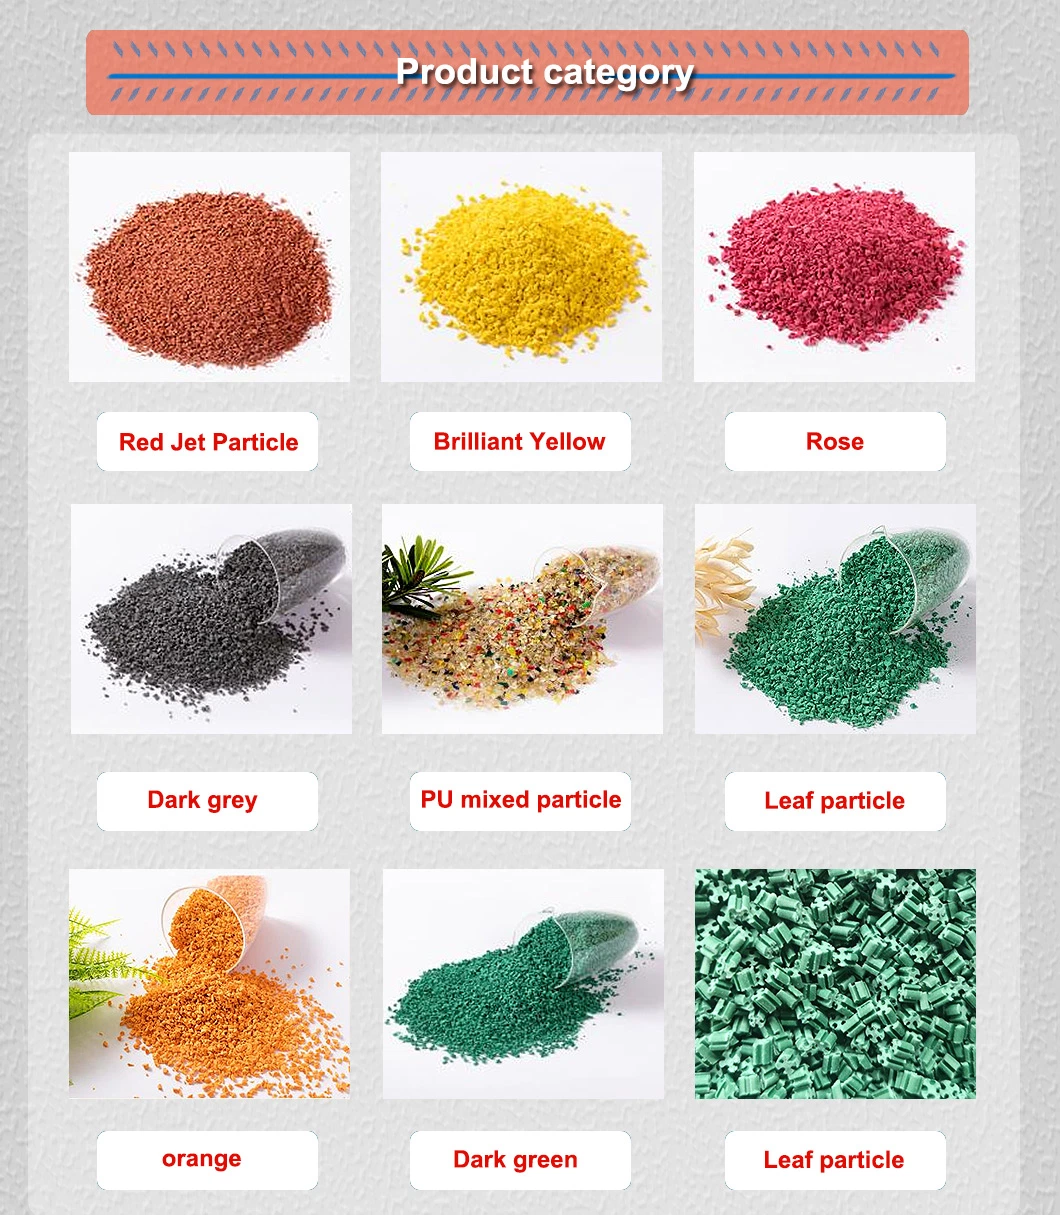 Sport Venue New Rubber Granules for Basketball Court Rubber Playground